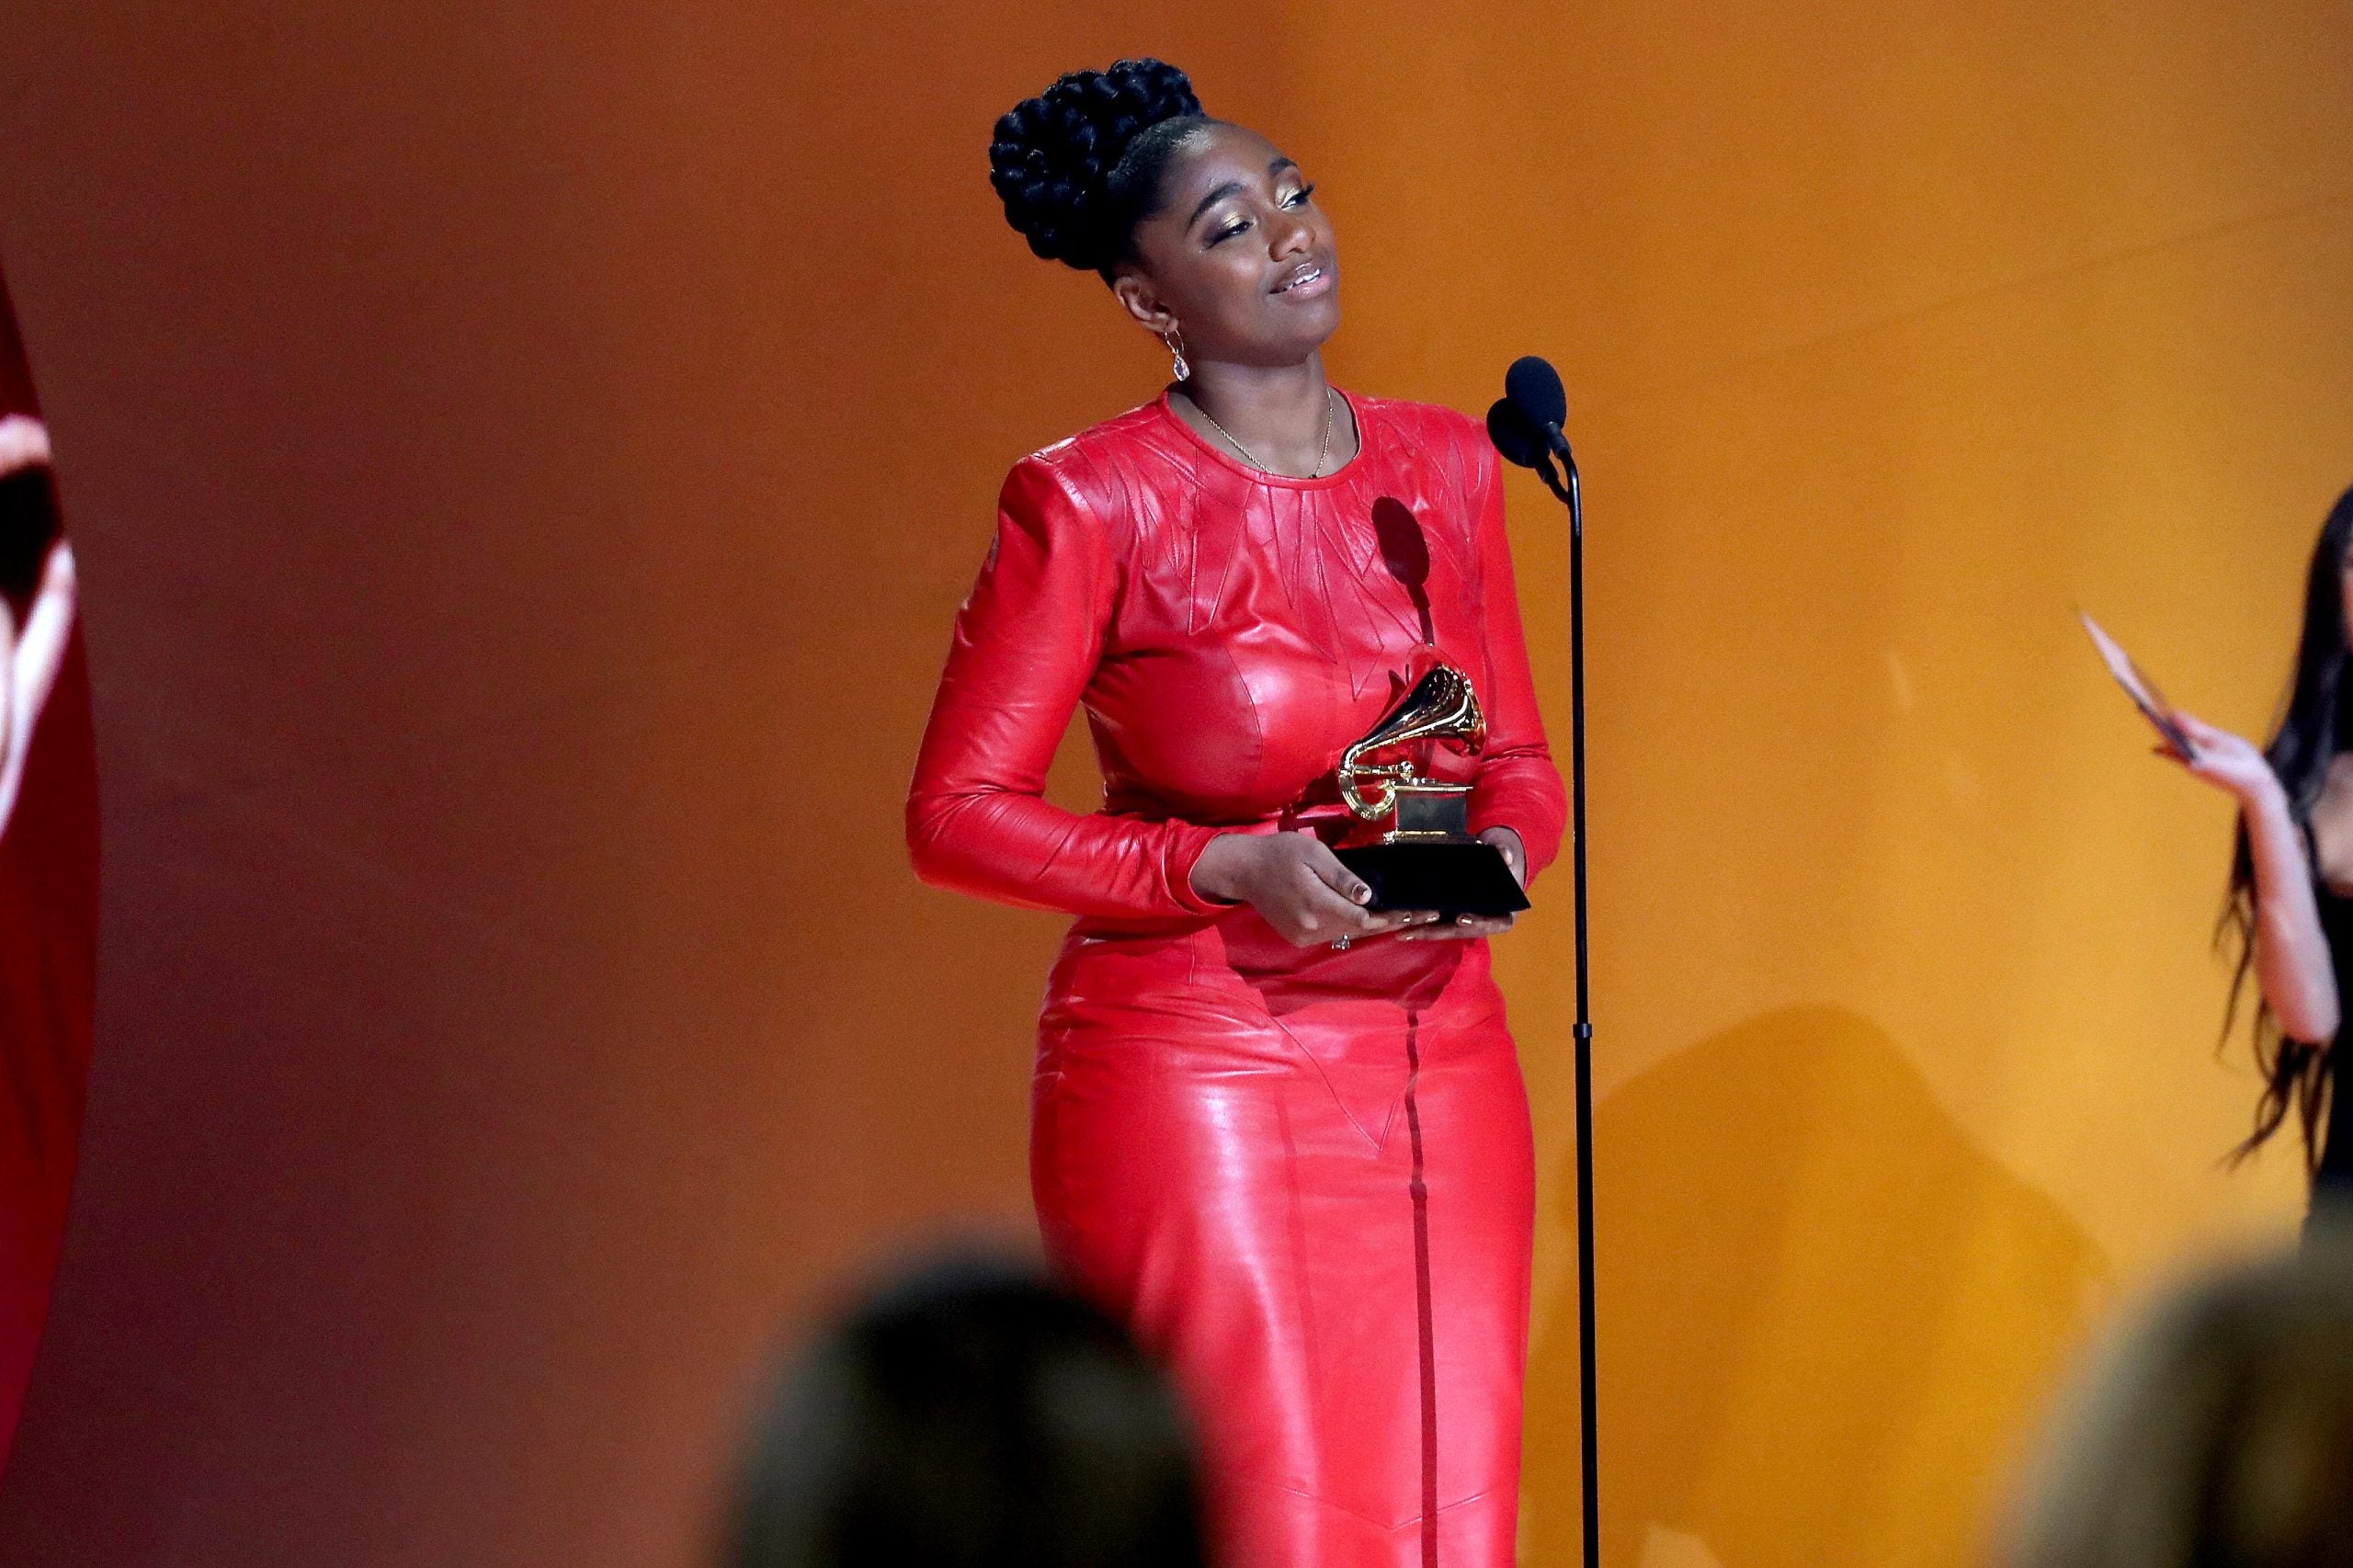 Top Moments From The 65th GRAMMY Awards